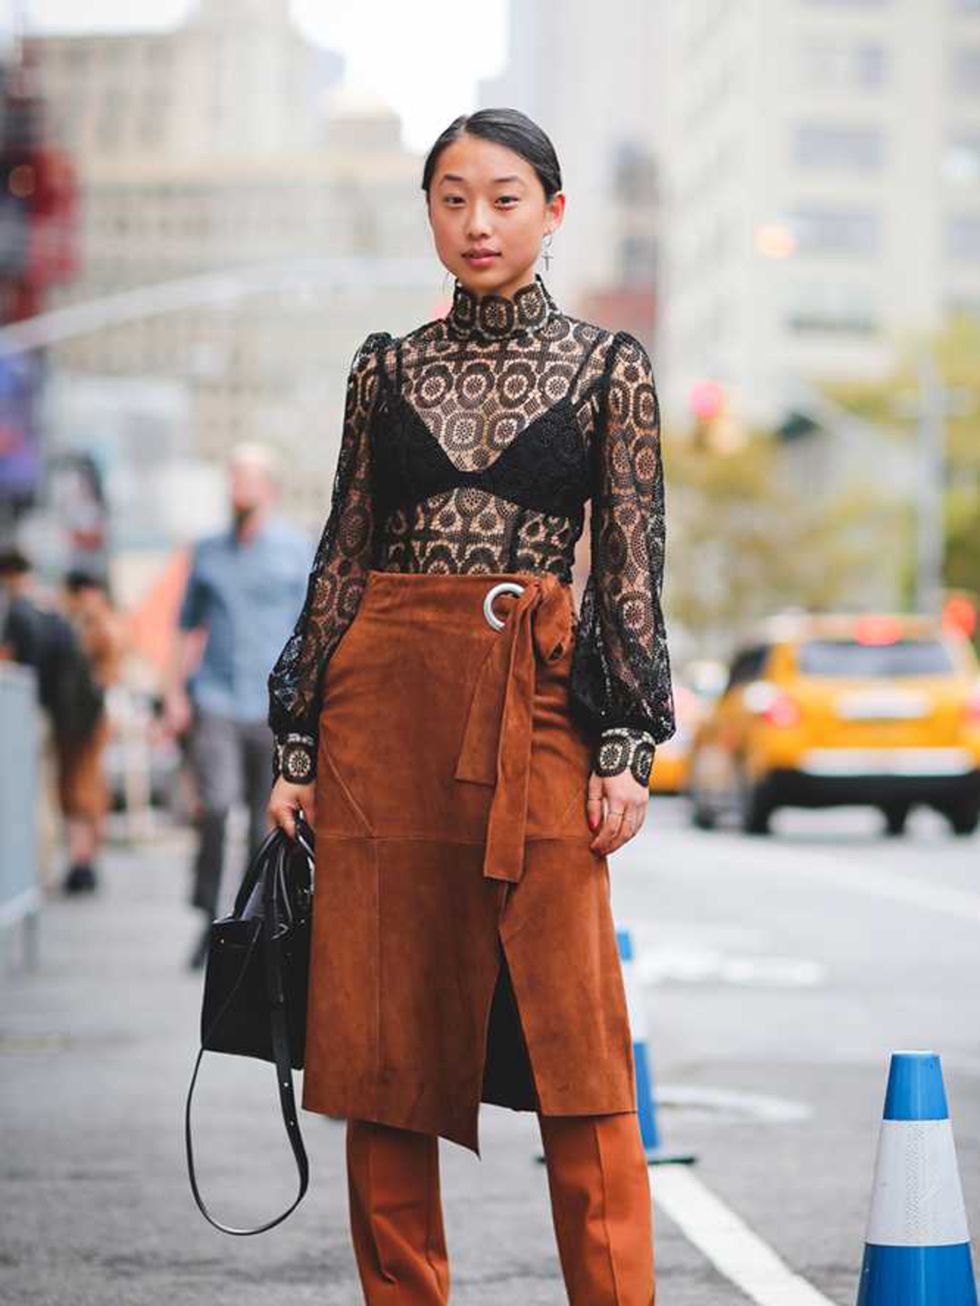 <p>Margaret Zhang mixes her textures on the streets of New York this fashion week with this Tibi FW15 suede wrap skirt and lace top Take inspiration from her style and get shopping for a textural AW15 wardrobe! </p>